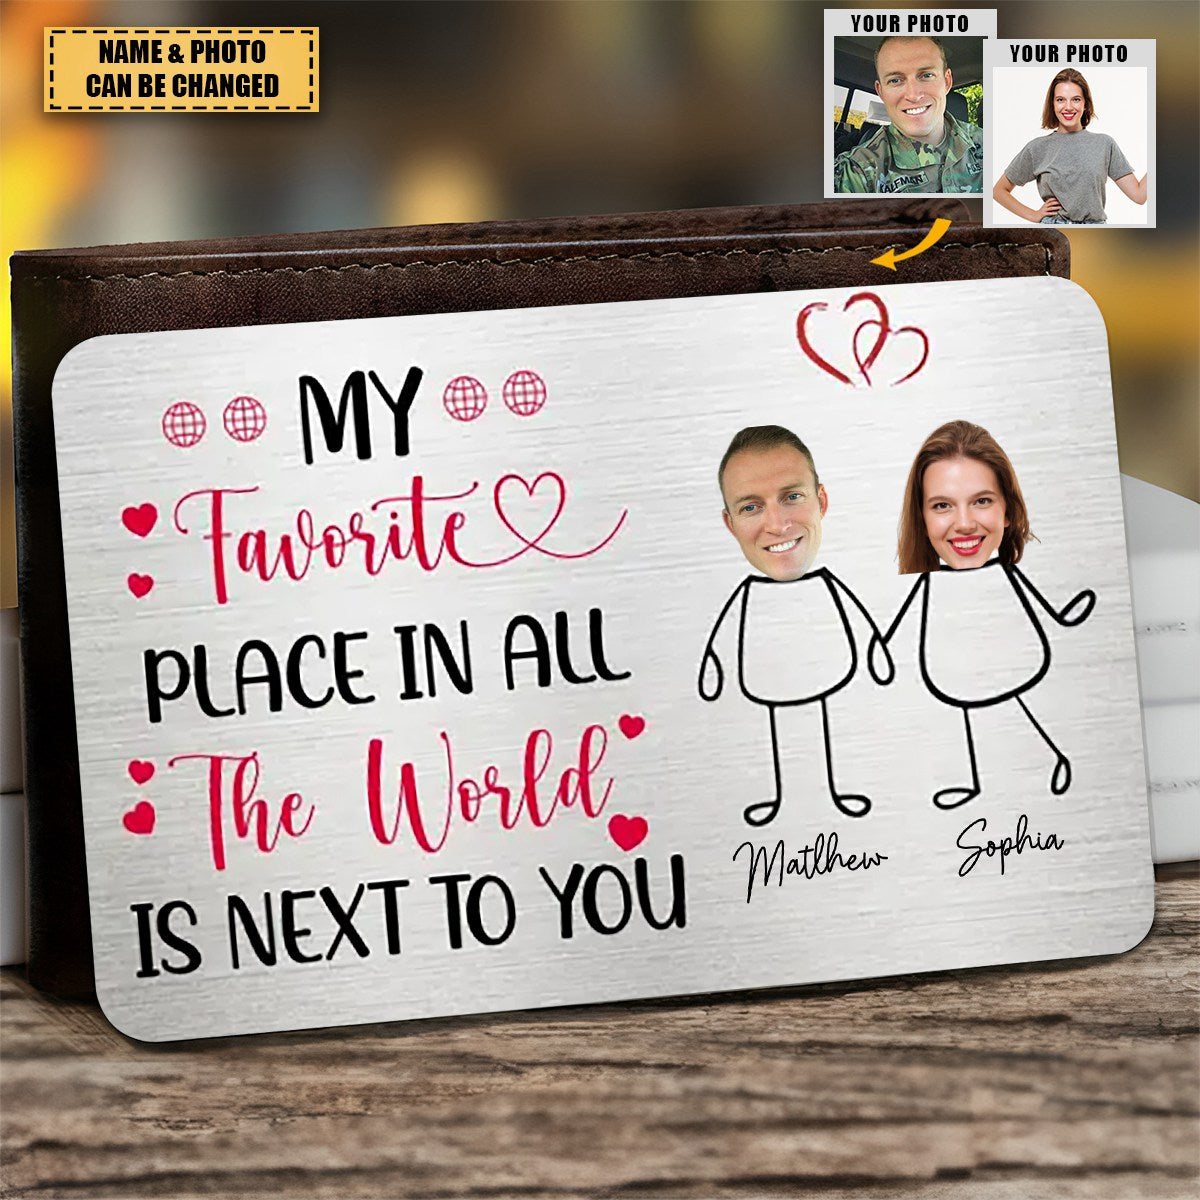 My Favorite Place In The World Is Next To You - Personalized Stainless Steel Wallet Card, Gift For Couple, Anniversary Gift